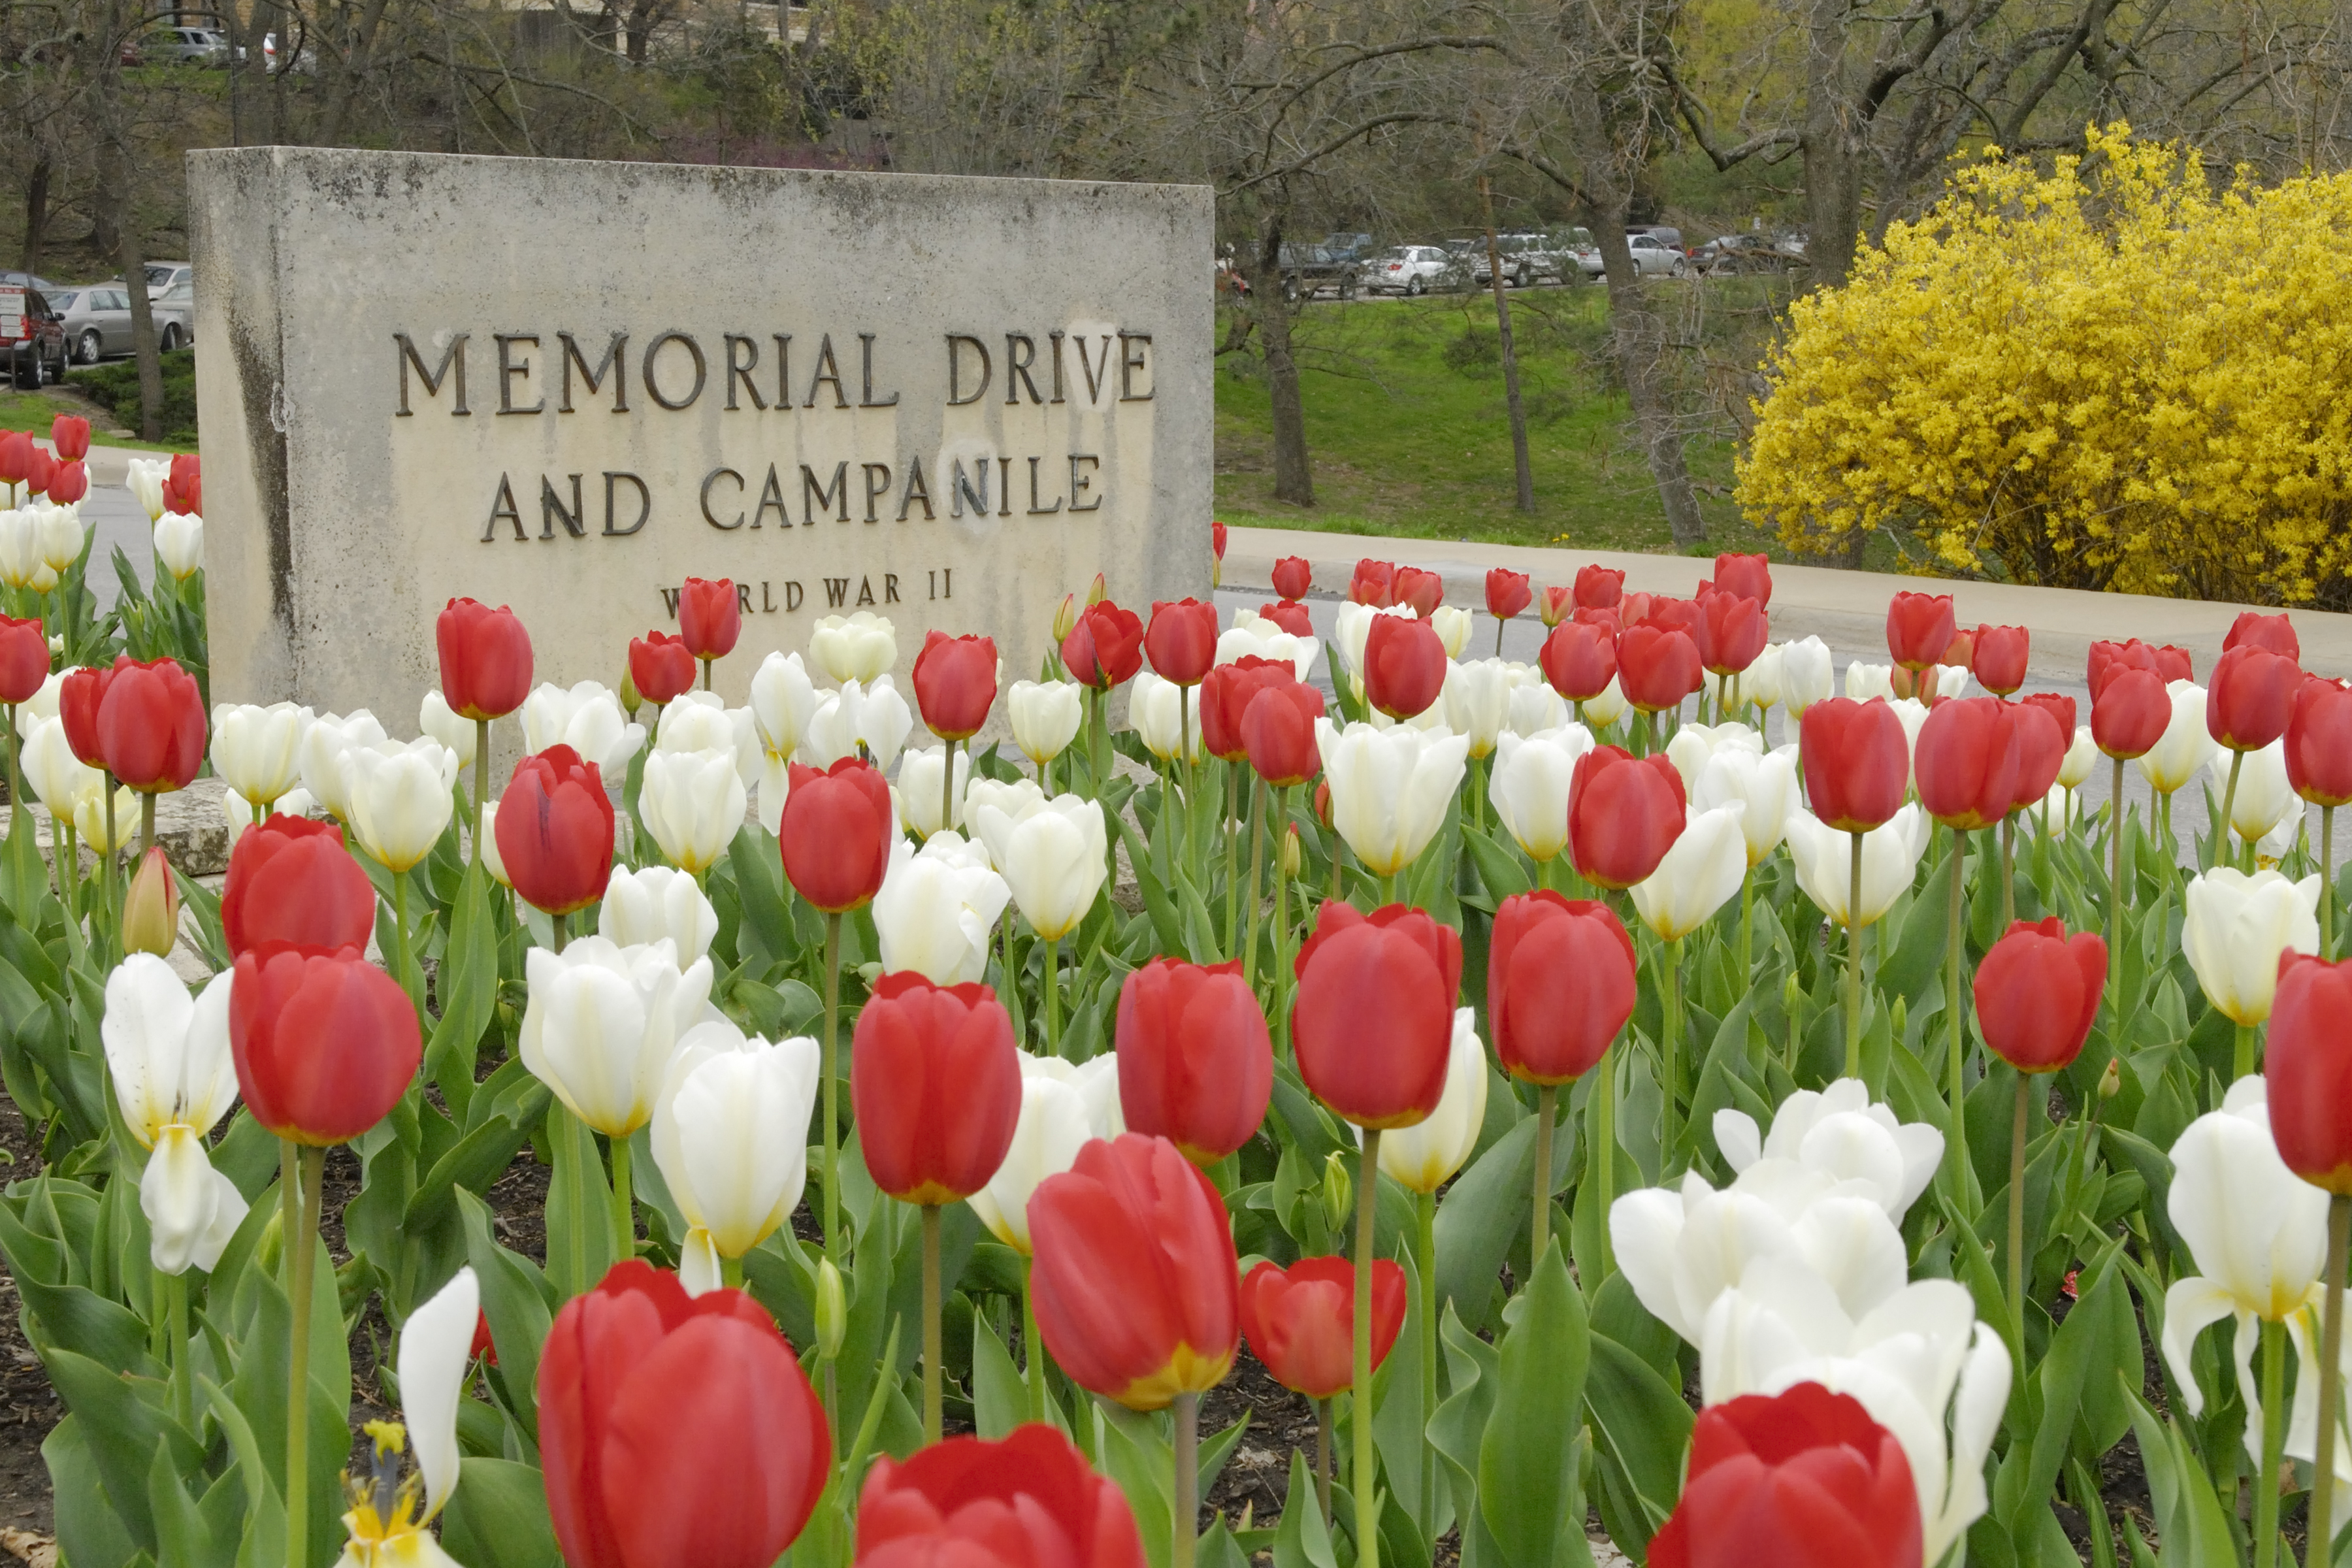 Red and white tulips in front of a cement sign reading “Memorial Drive and Campanile: World War II”